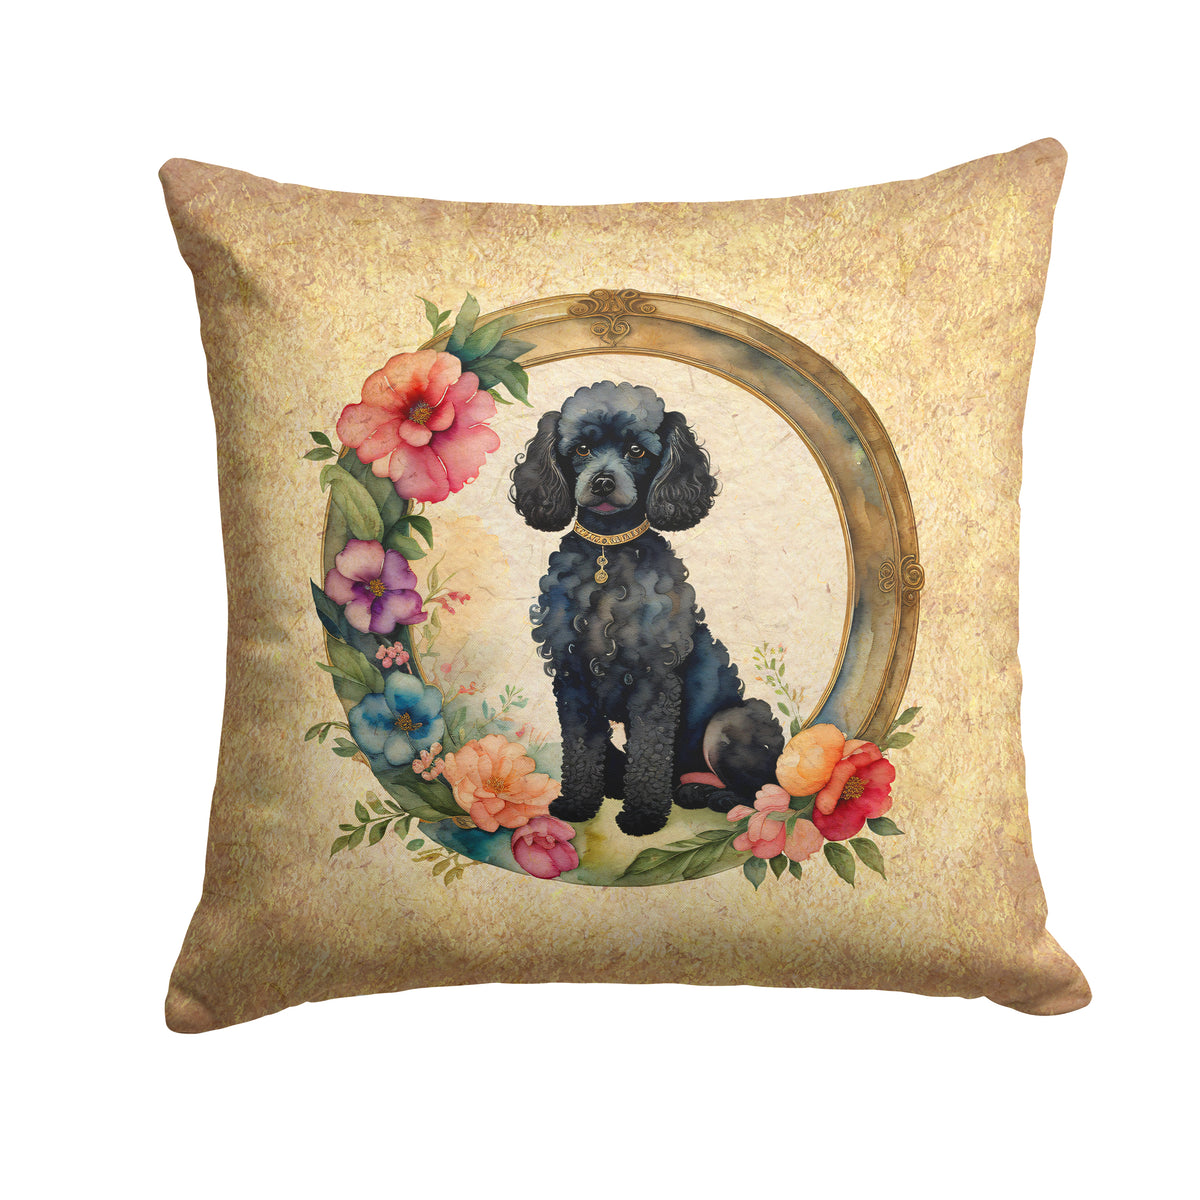 Buy this Black Poodle and Flowers Fabric Decorative Pillow